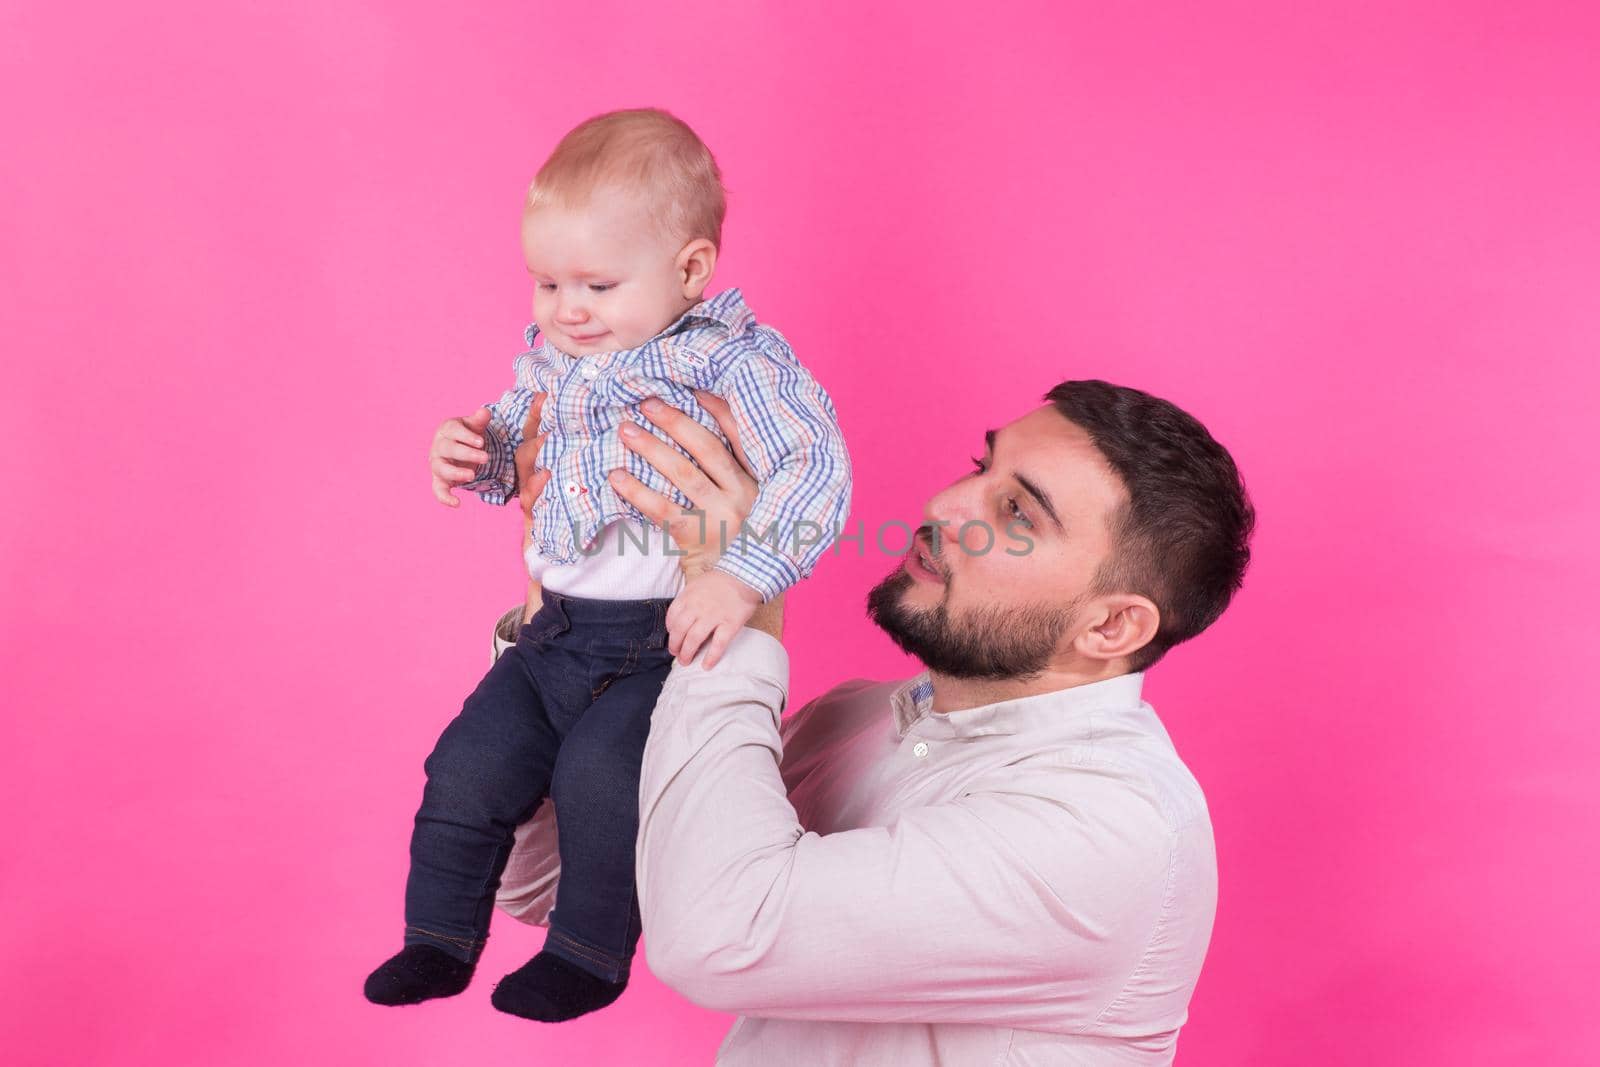 happy father with a baby son isolated on a pink background by Satura86